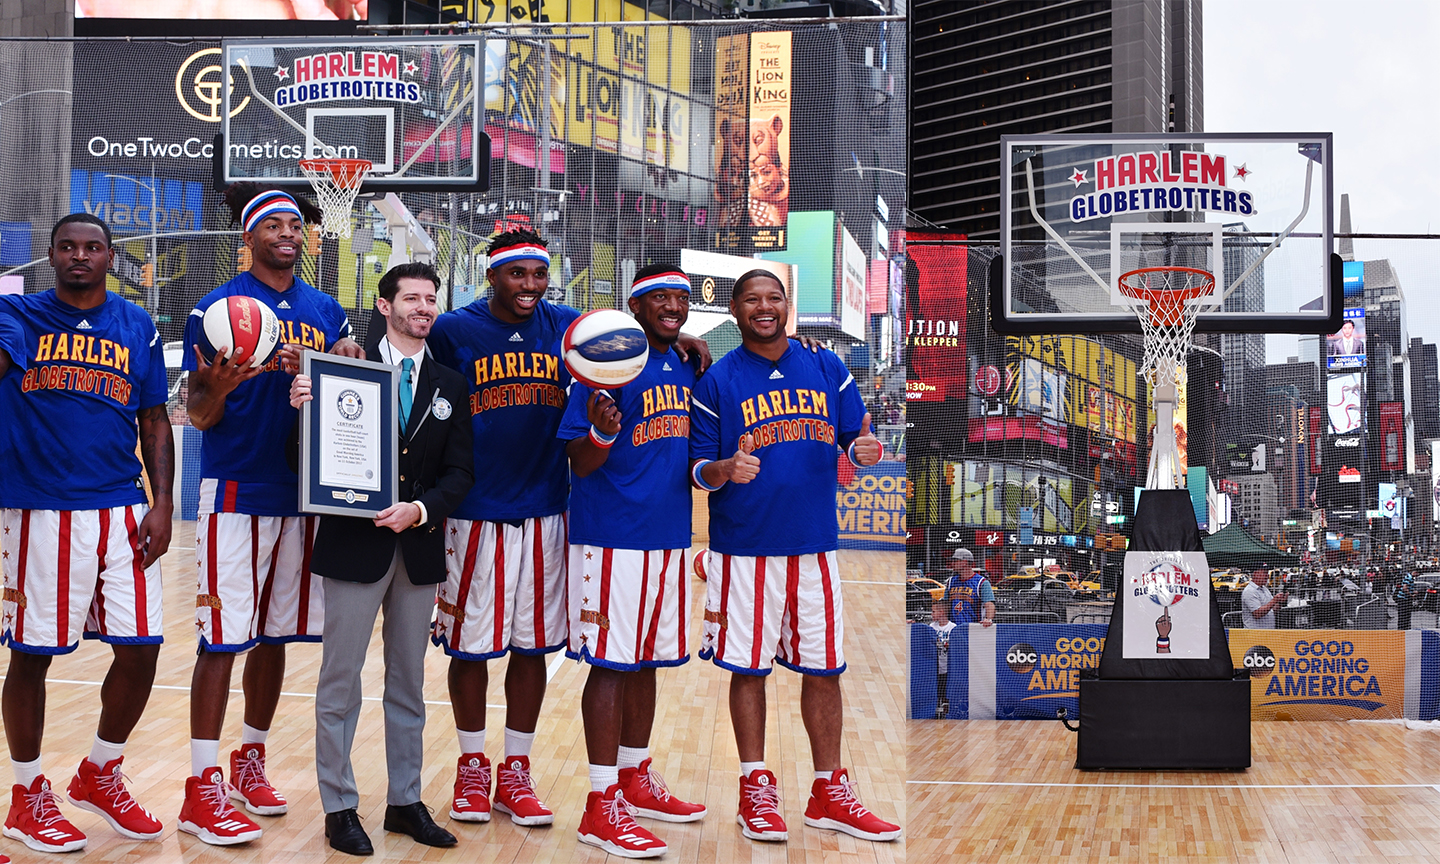 Good Morning America with The Harlem Globetrotters